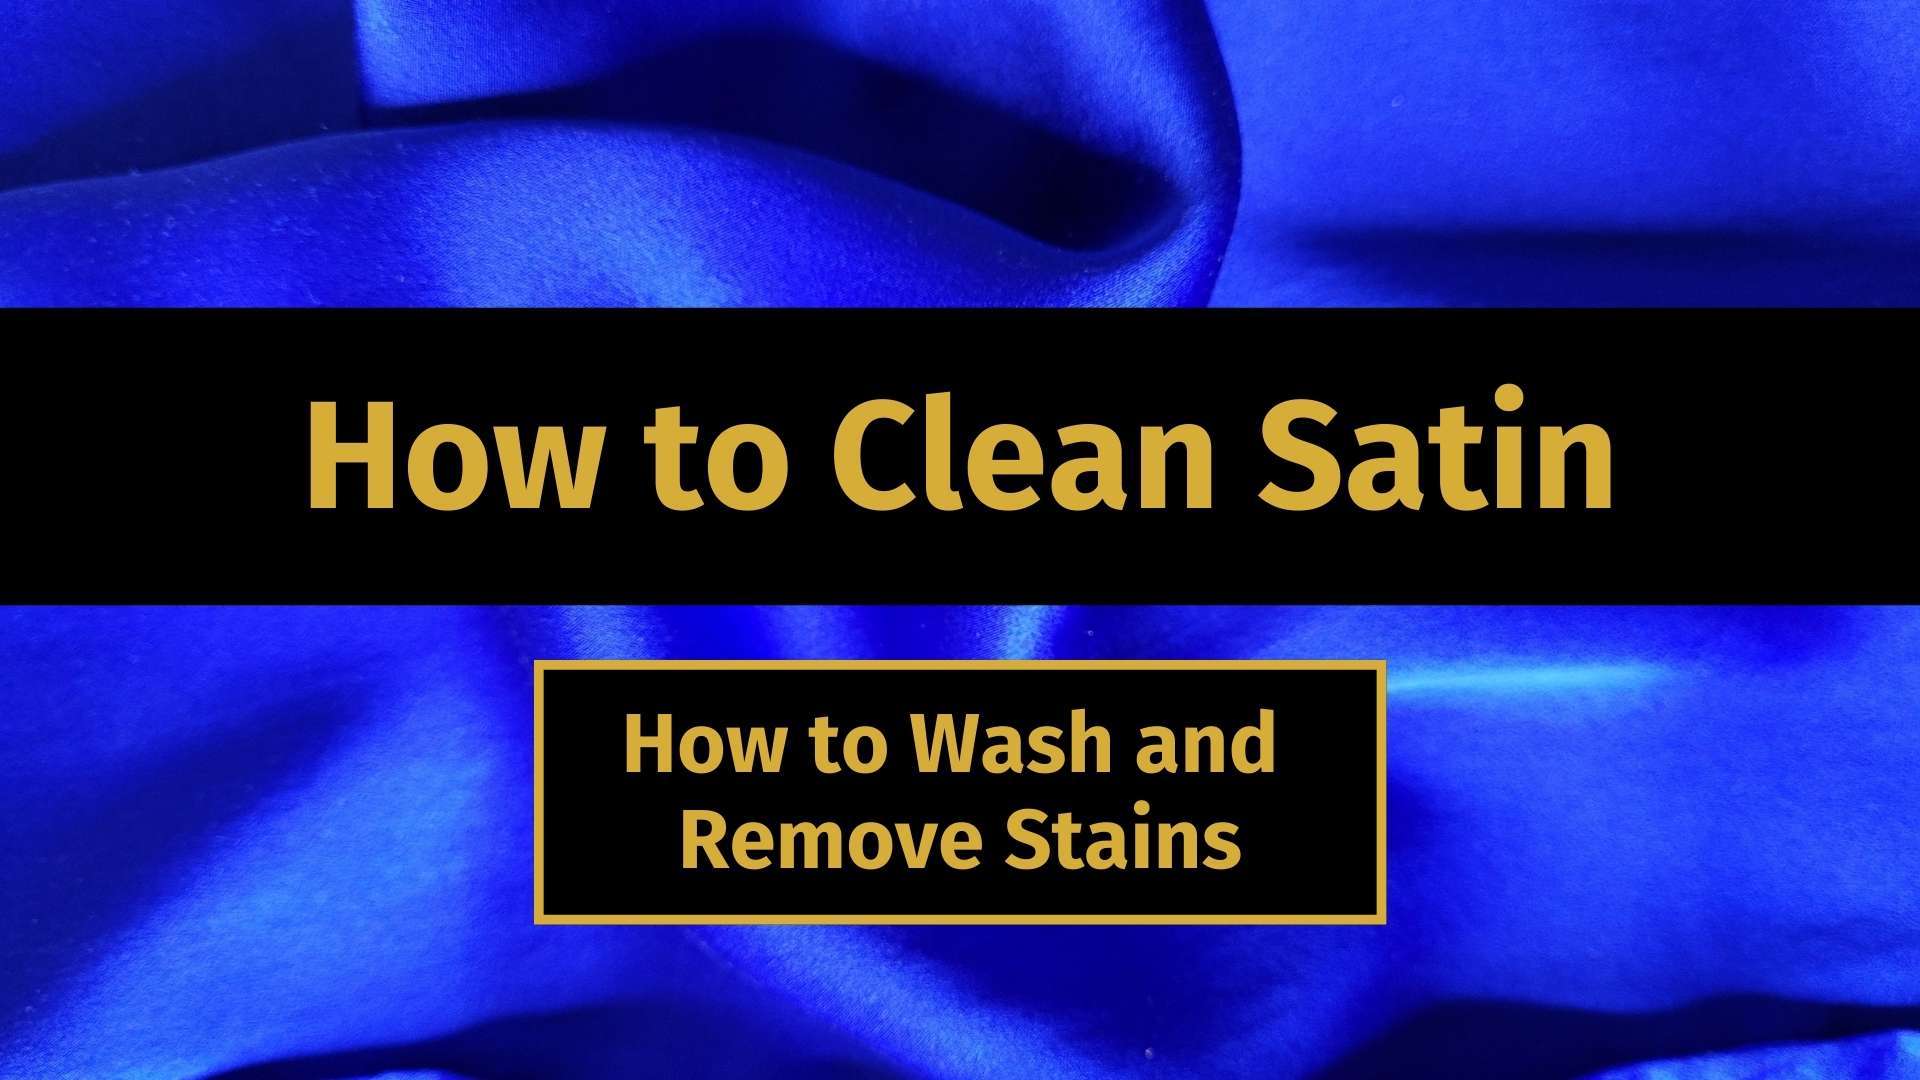 how to clean satin banner image